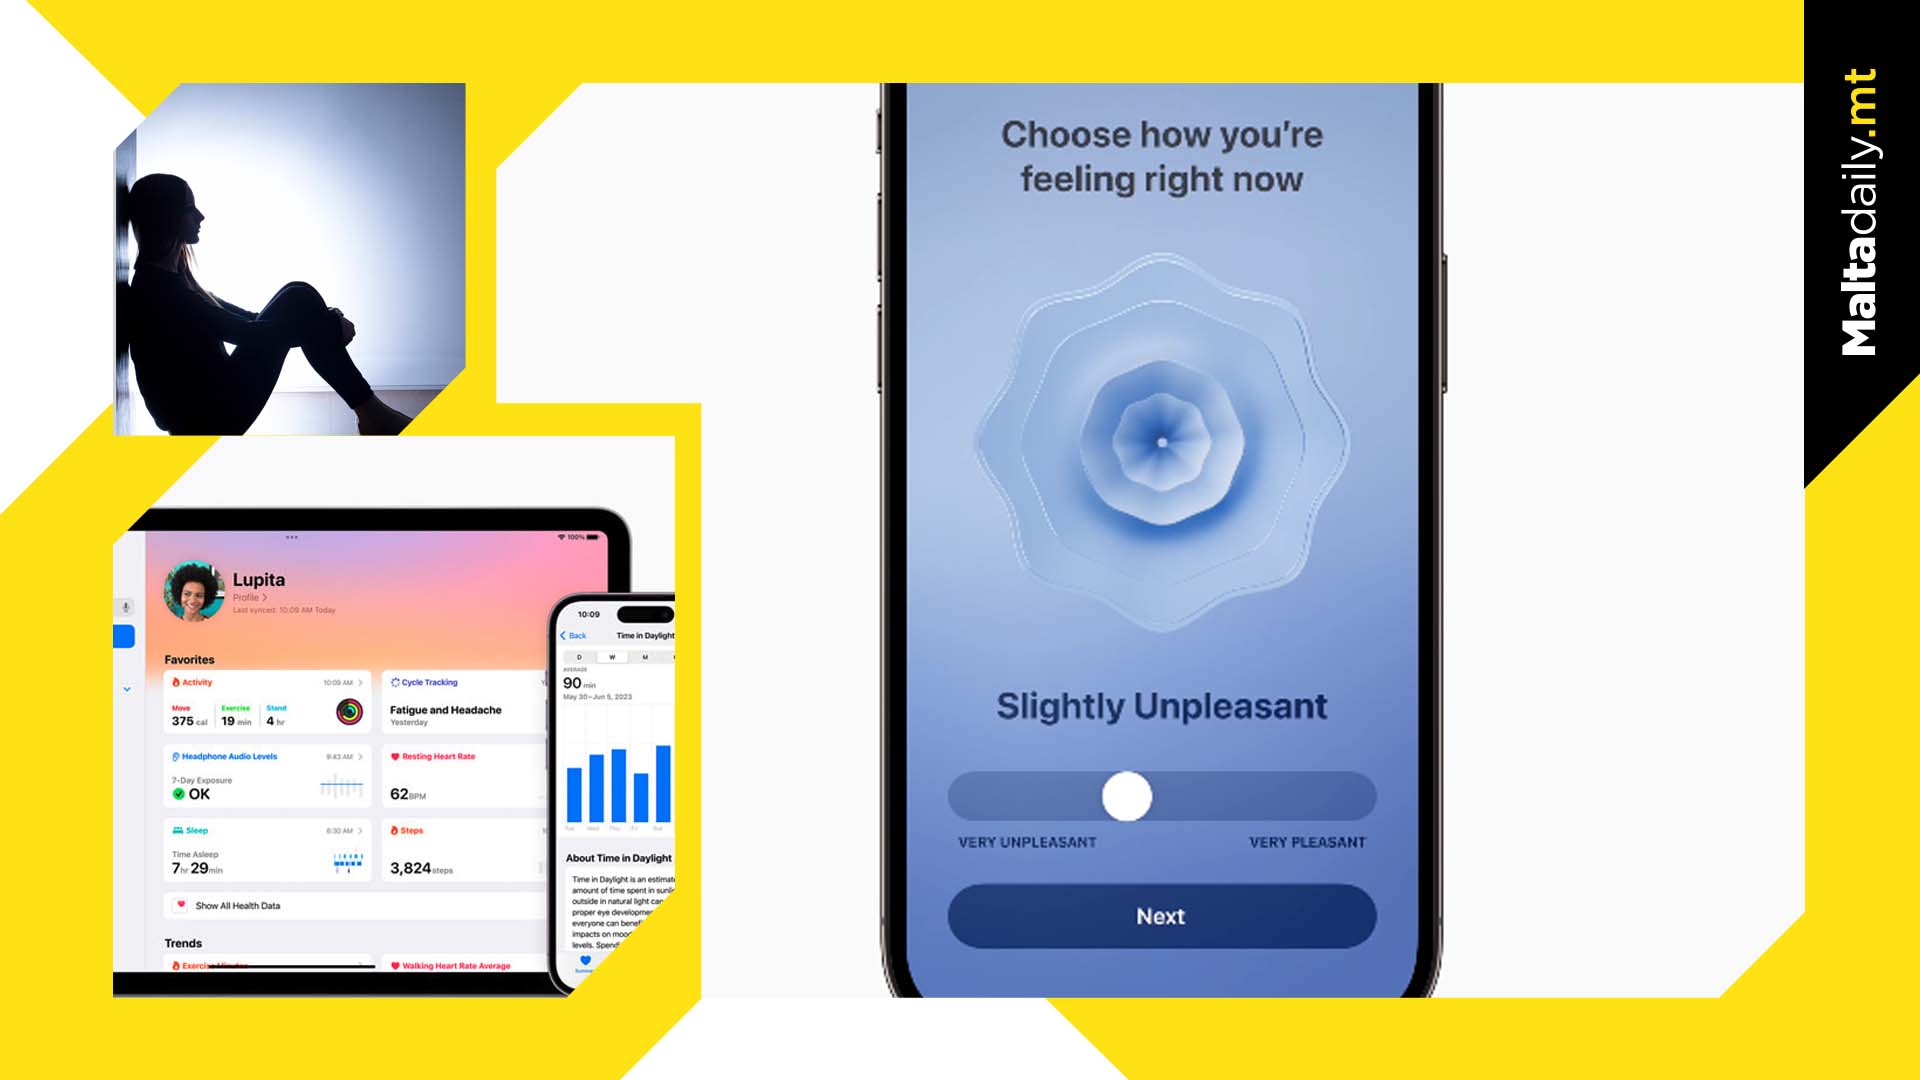 Apple's new mental health feature helps identify depression